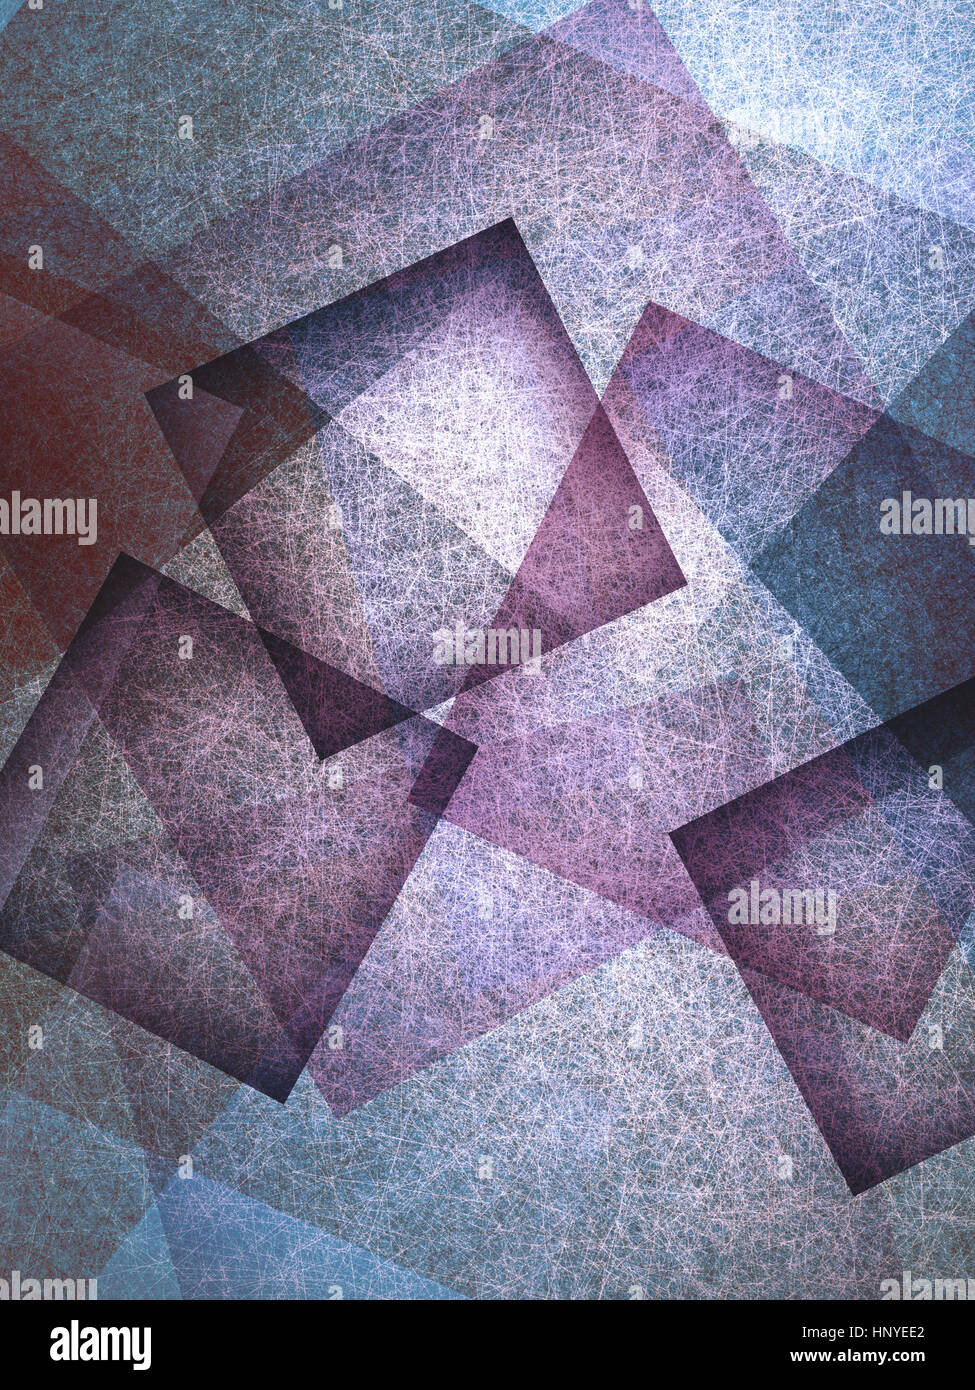 abstract purple burgundy and blue gray background with geometric design, layers of intersecting angles, transparent rectangles diamonds and squares fl Stock Photo